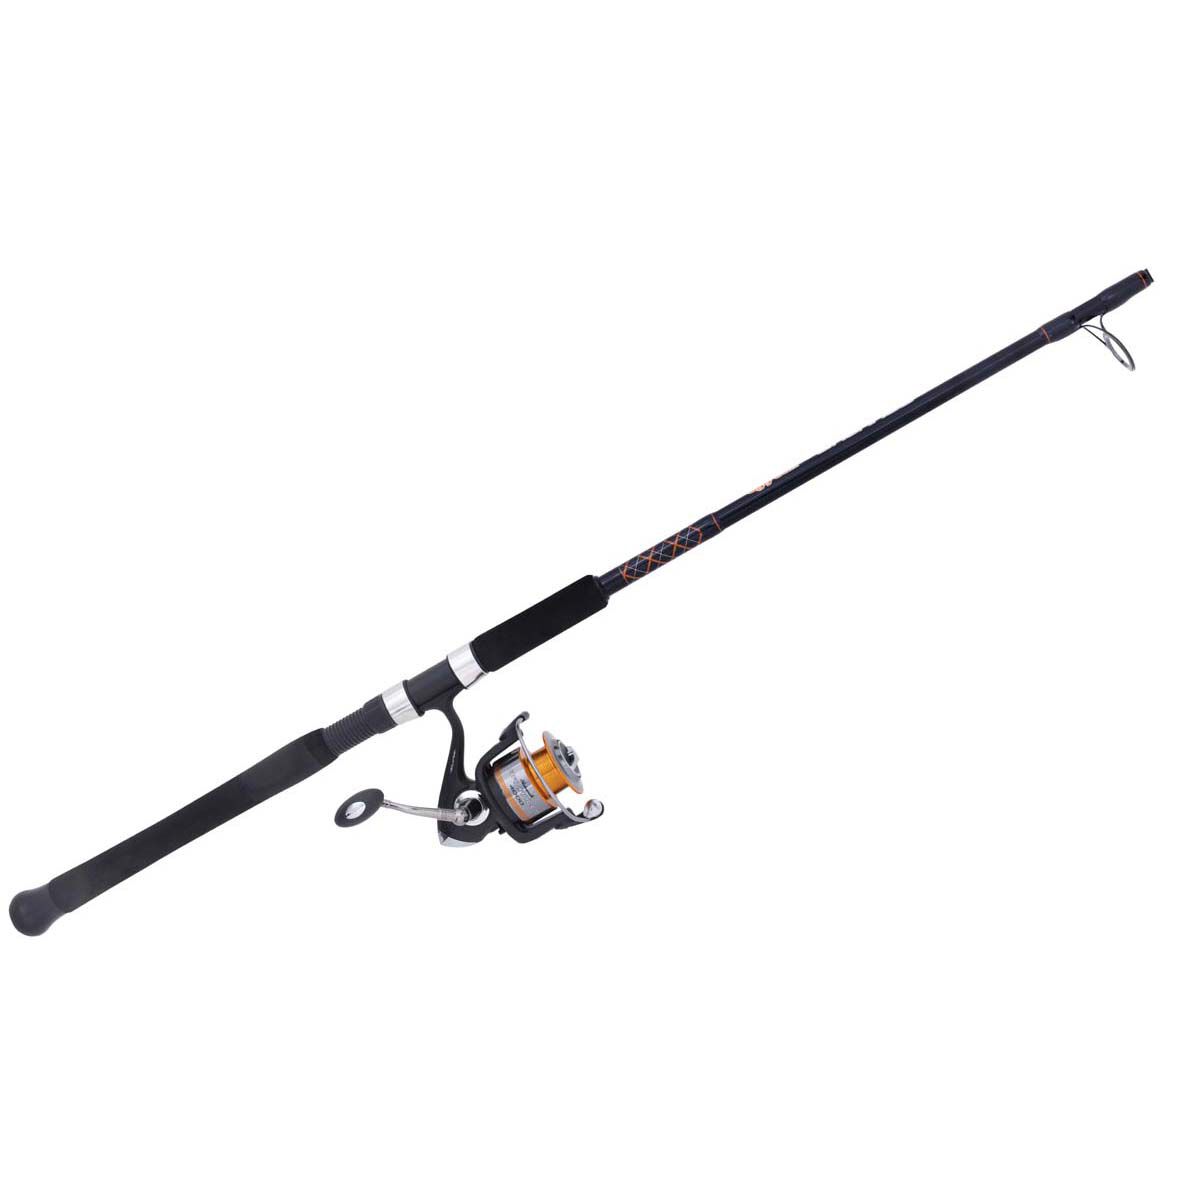 New Ugly Stik GX2 Spinning Fishing Rod and Reel Spinning Combo 7ft